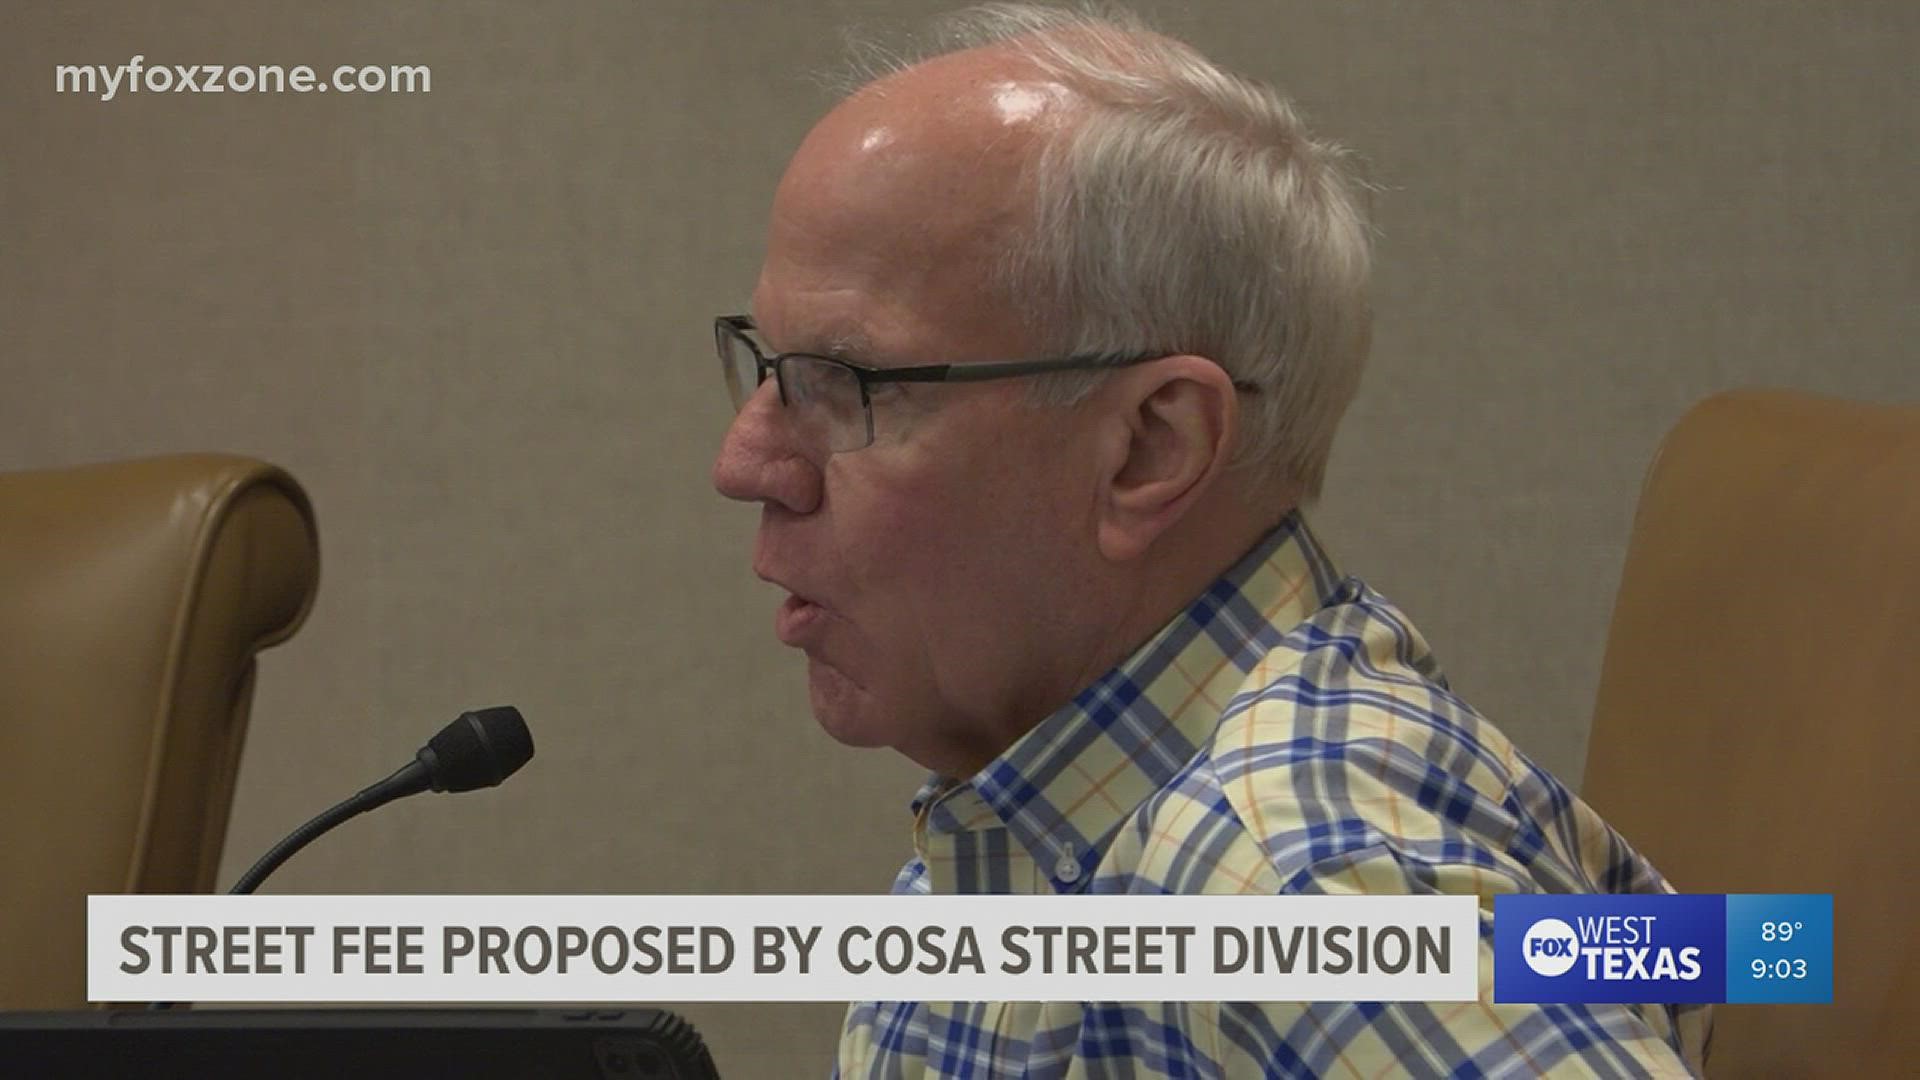 The goal of the street use fee would be to provide funding for continued street repairs and improvements without increasing property taxes or adding debt.